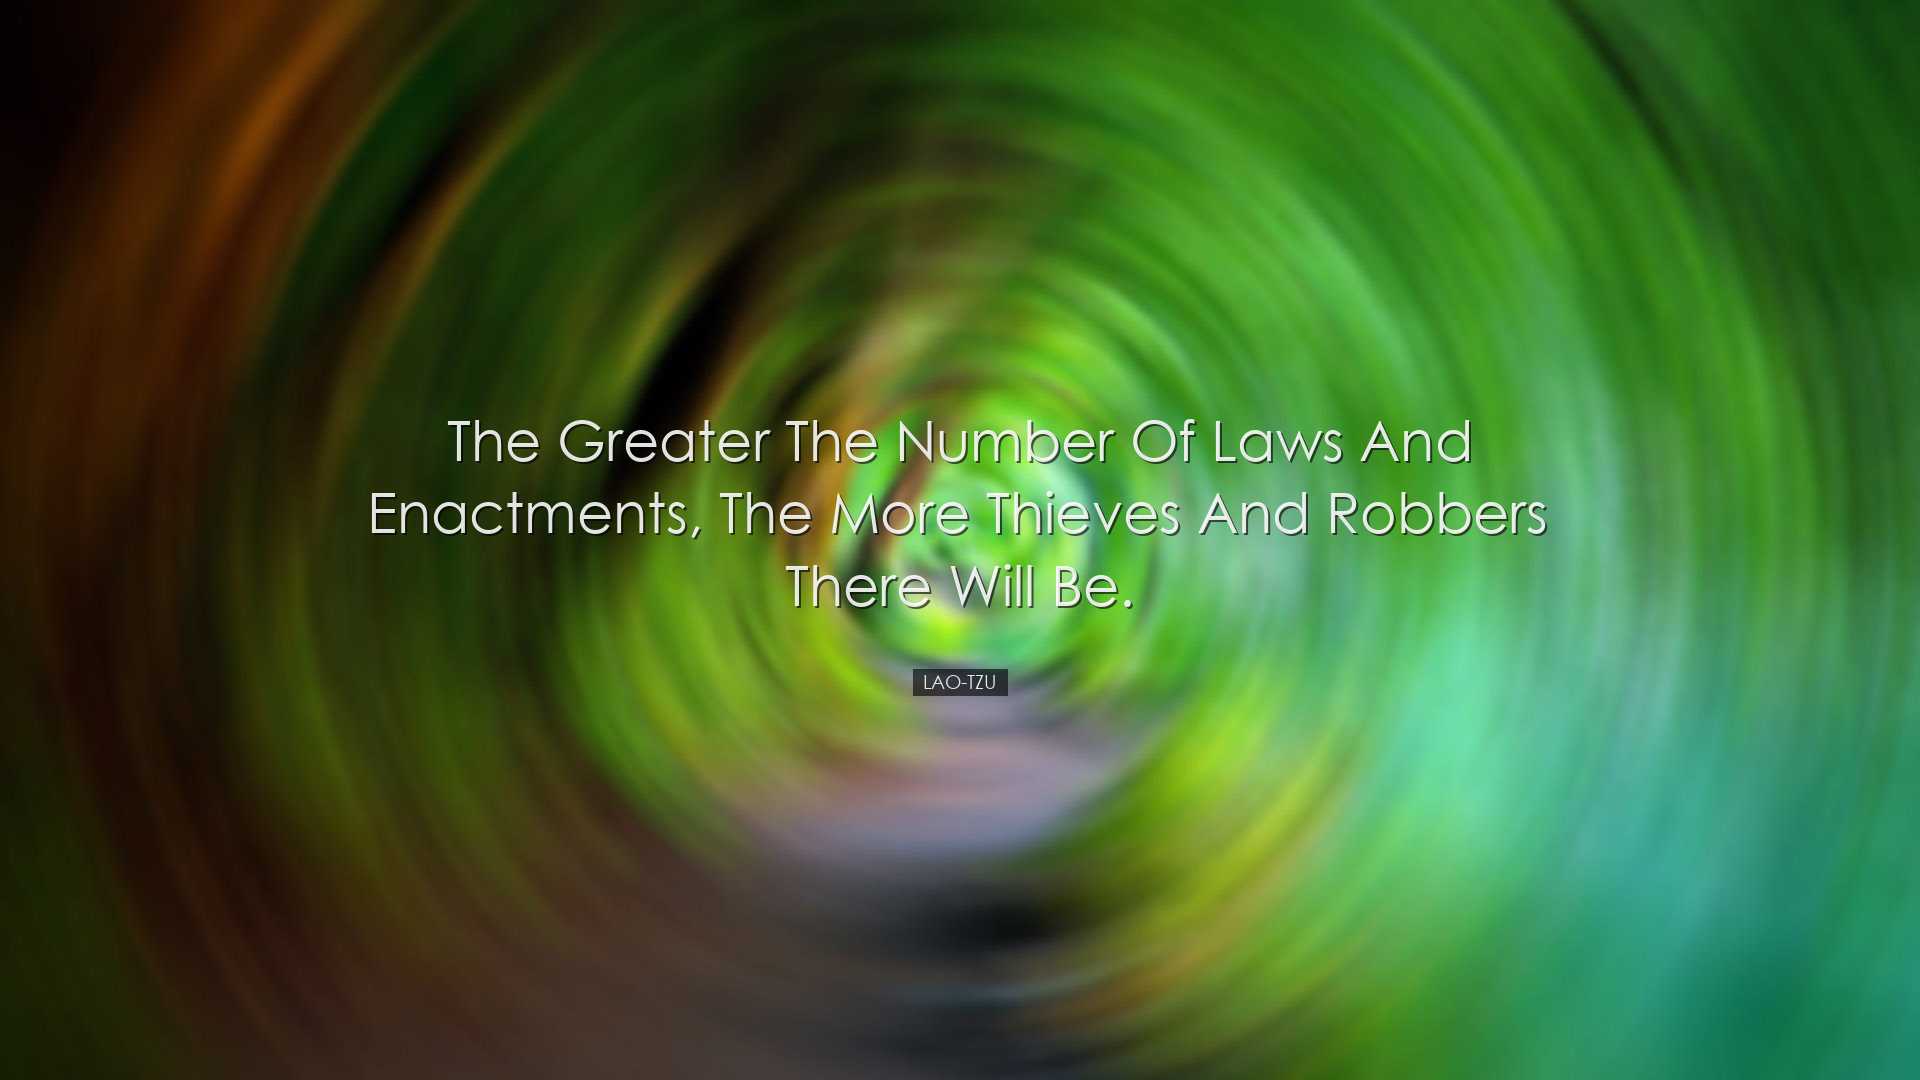 The greater the number of laws and enactments, the more thieves an